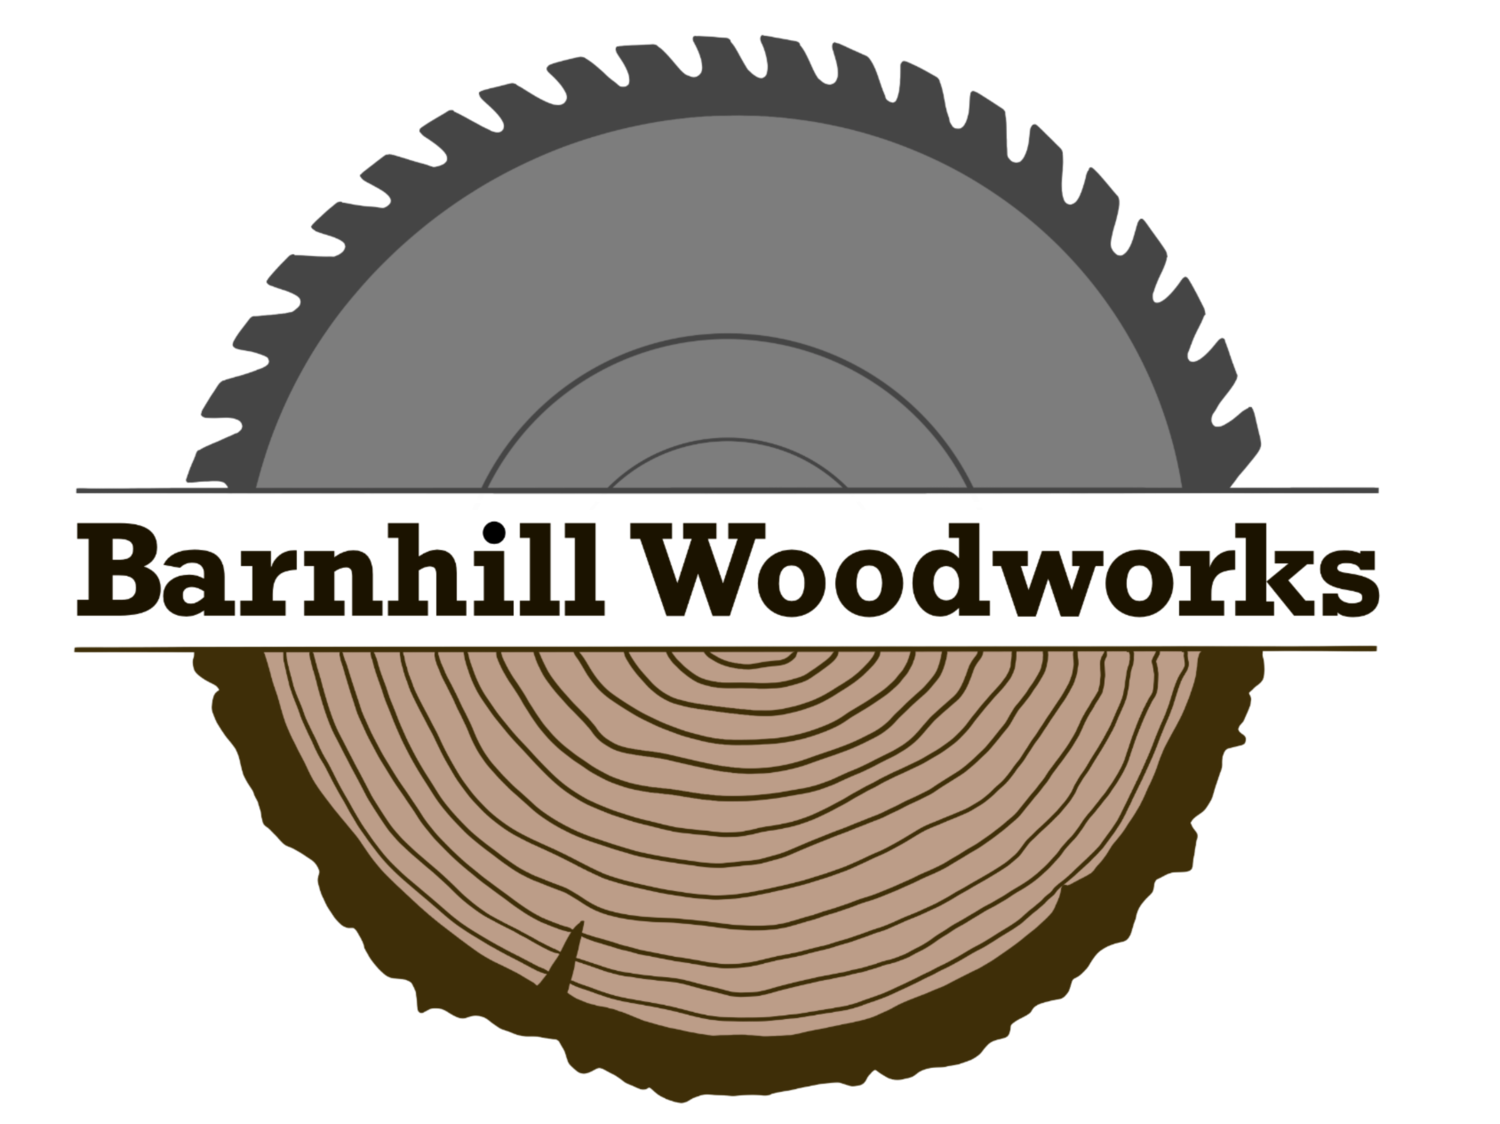 Barnhill Woodworks